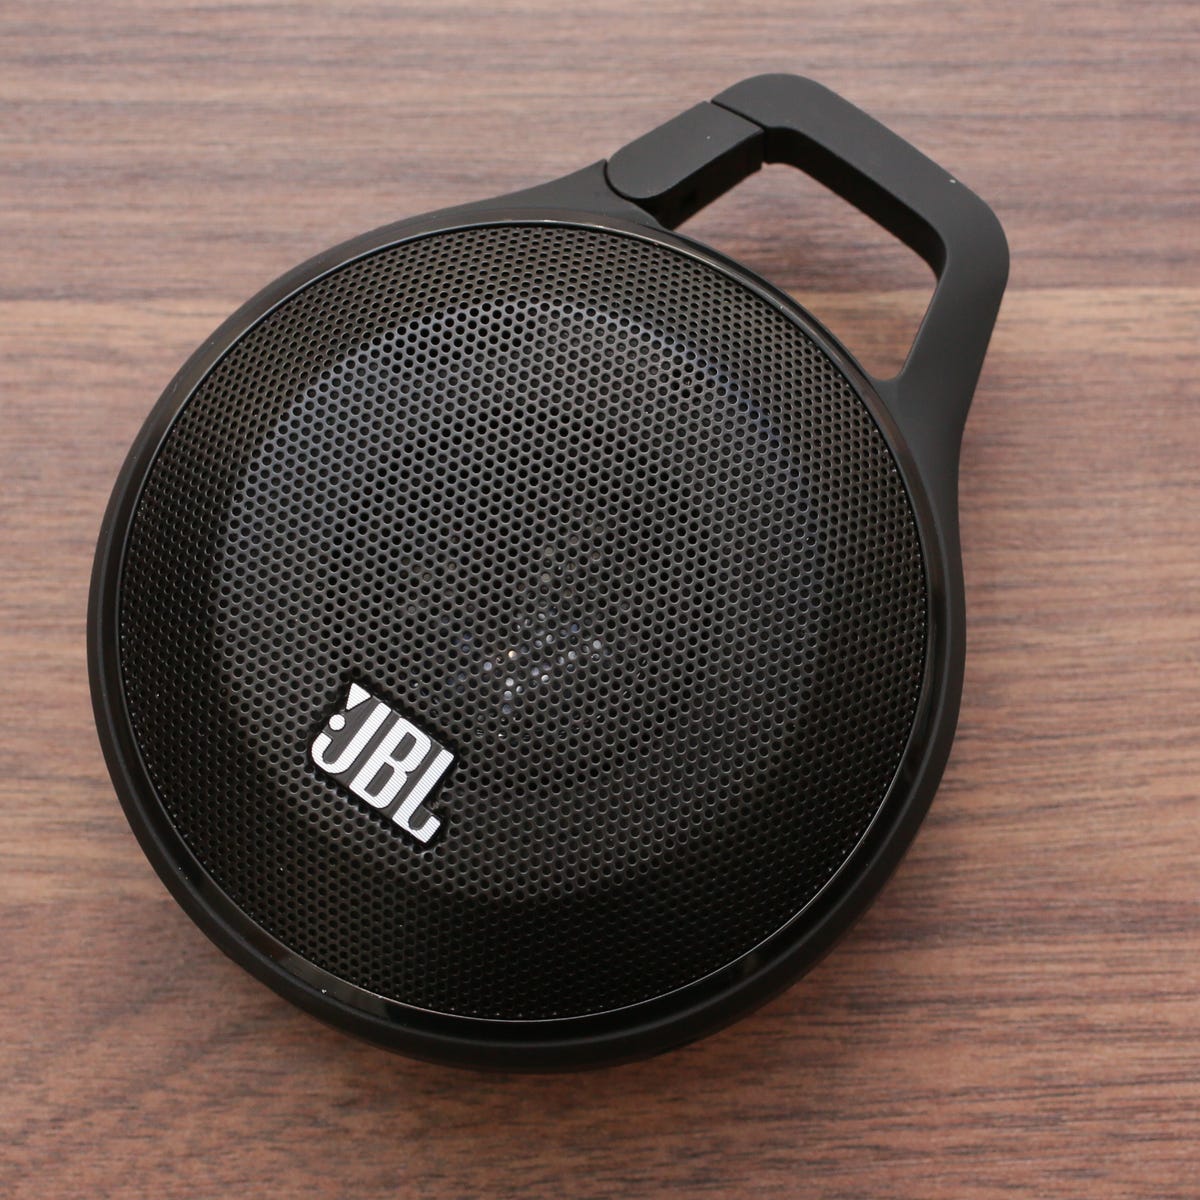 JBL Clip (Black) review: A tiny Bluetooth speaker that sounds good for its  size and travels well - CNET